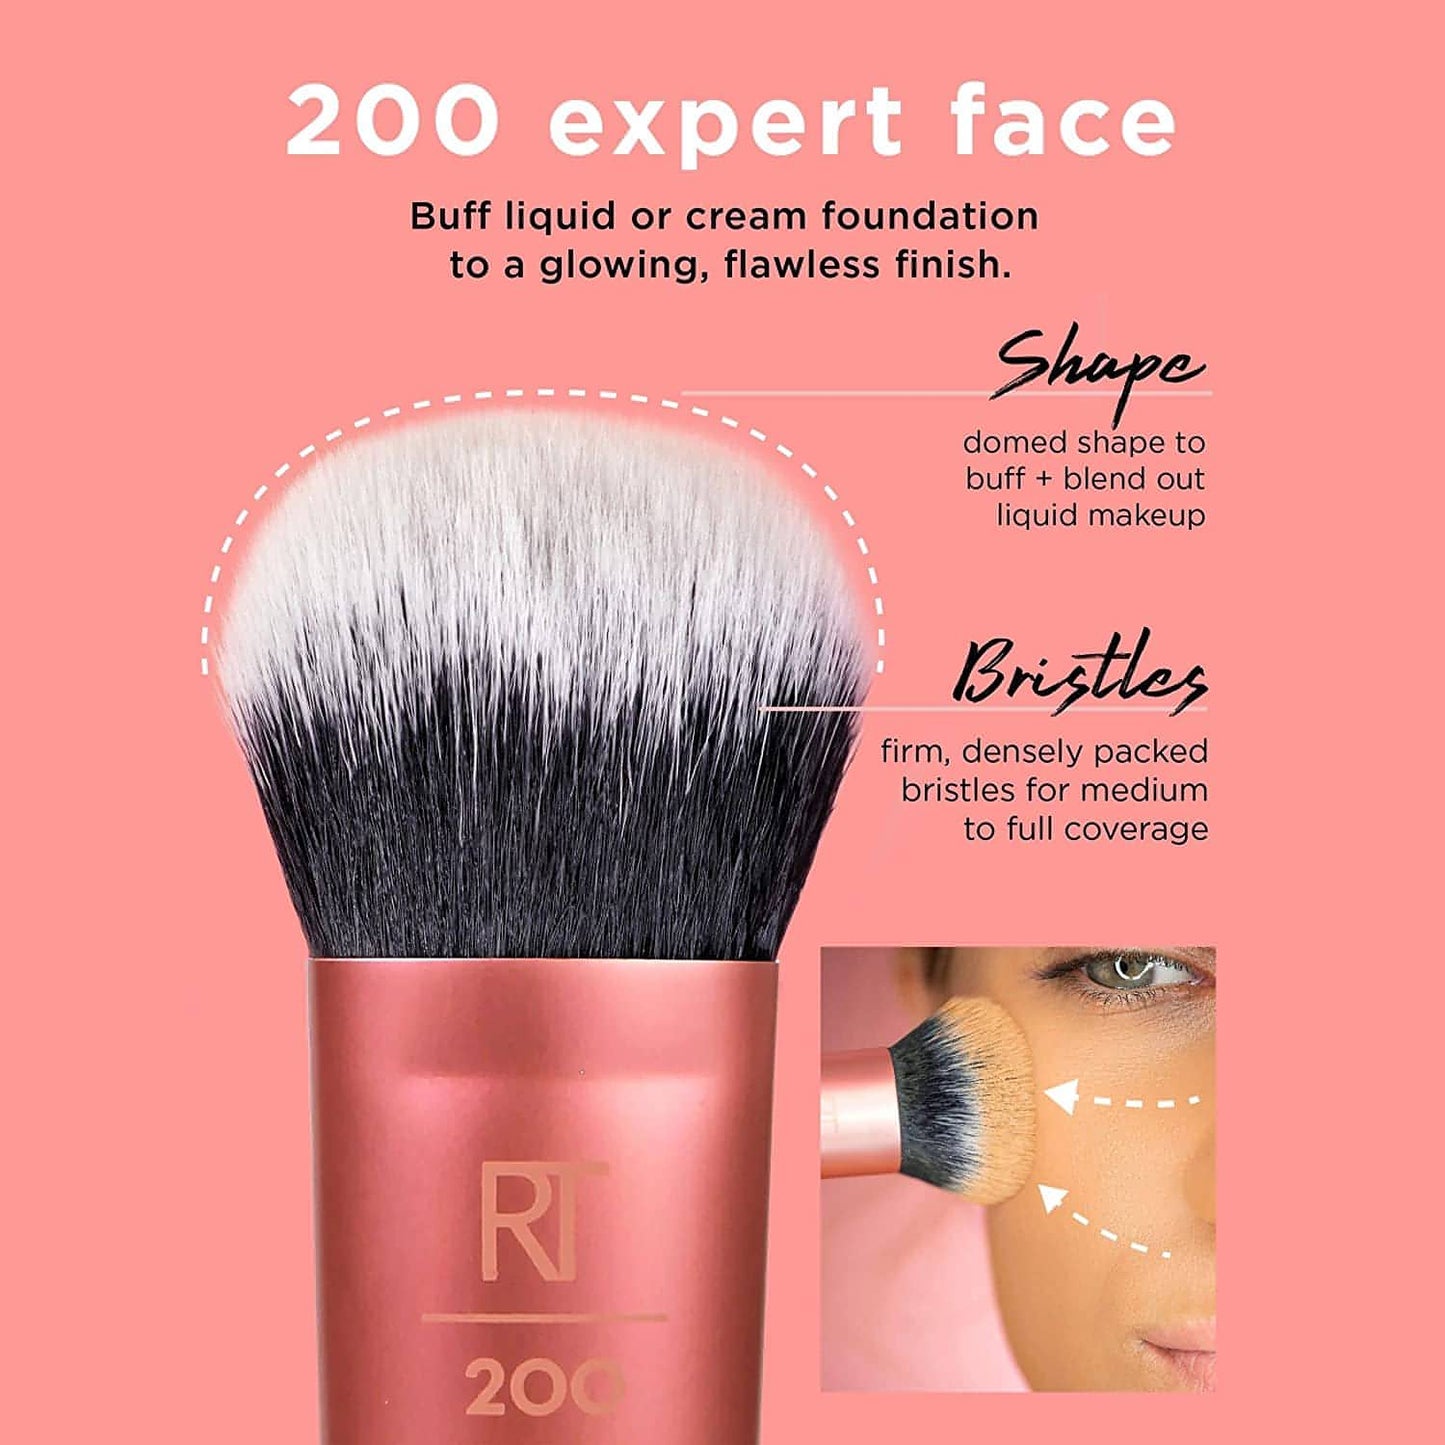 The Everyday Essentials set from Real Techniques gives you 5 essential tools to master any look tapered, soft and fluffy bristles. Blend powder blush evenly for a smooth, natural look